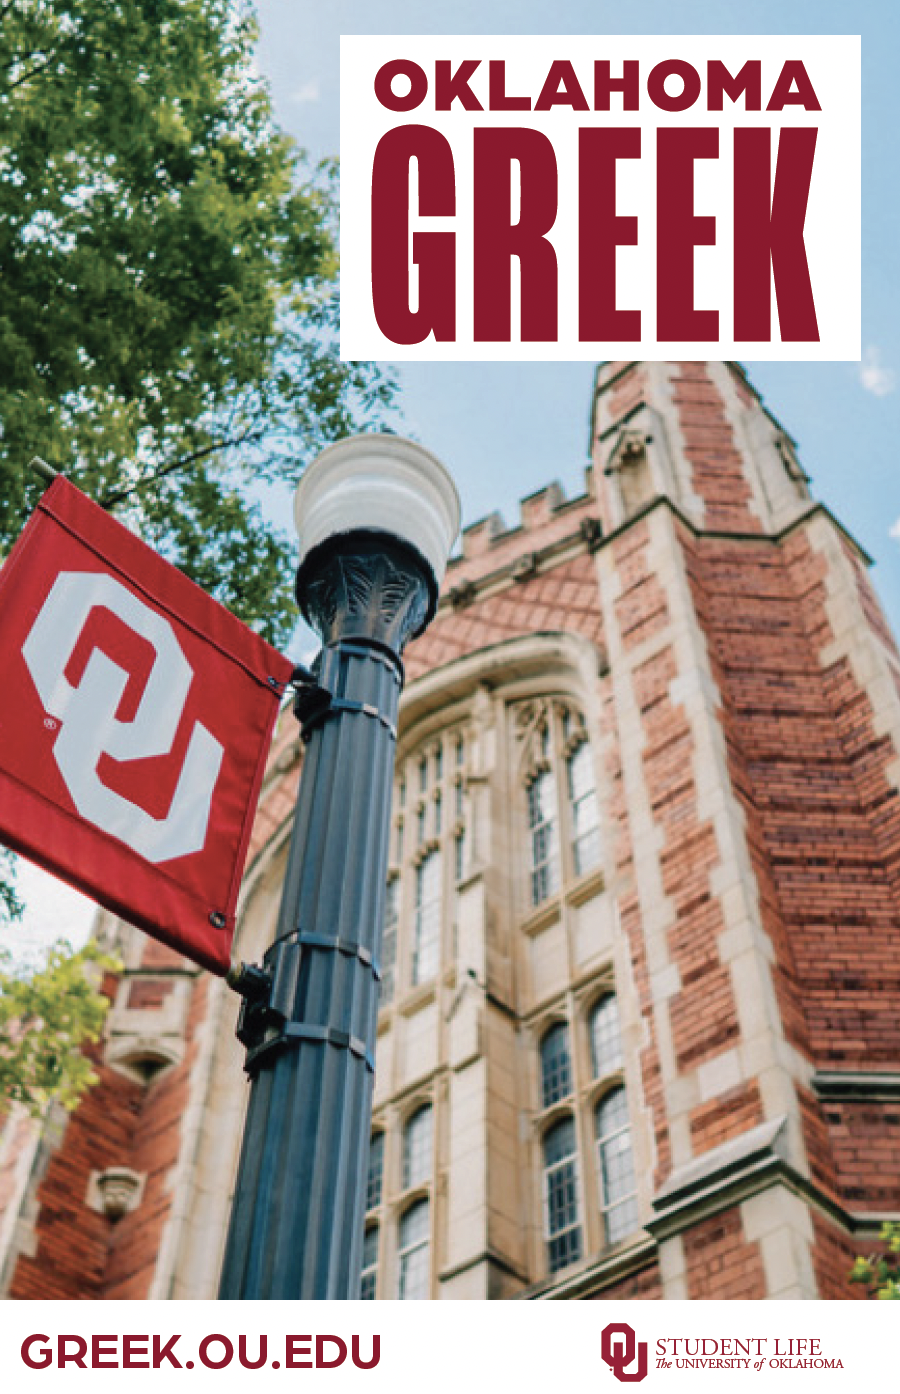 Front cover of Fraternity and Sorority Experience Guide publication. Oklahoma Greek. Learn more at greek.ou.edu.